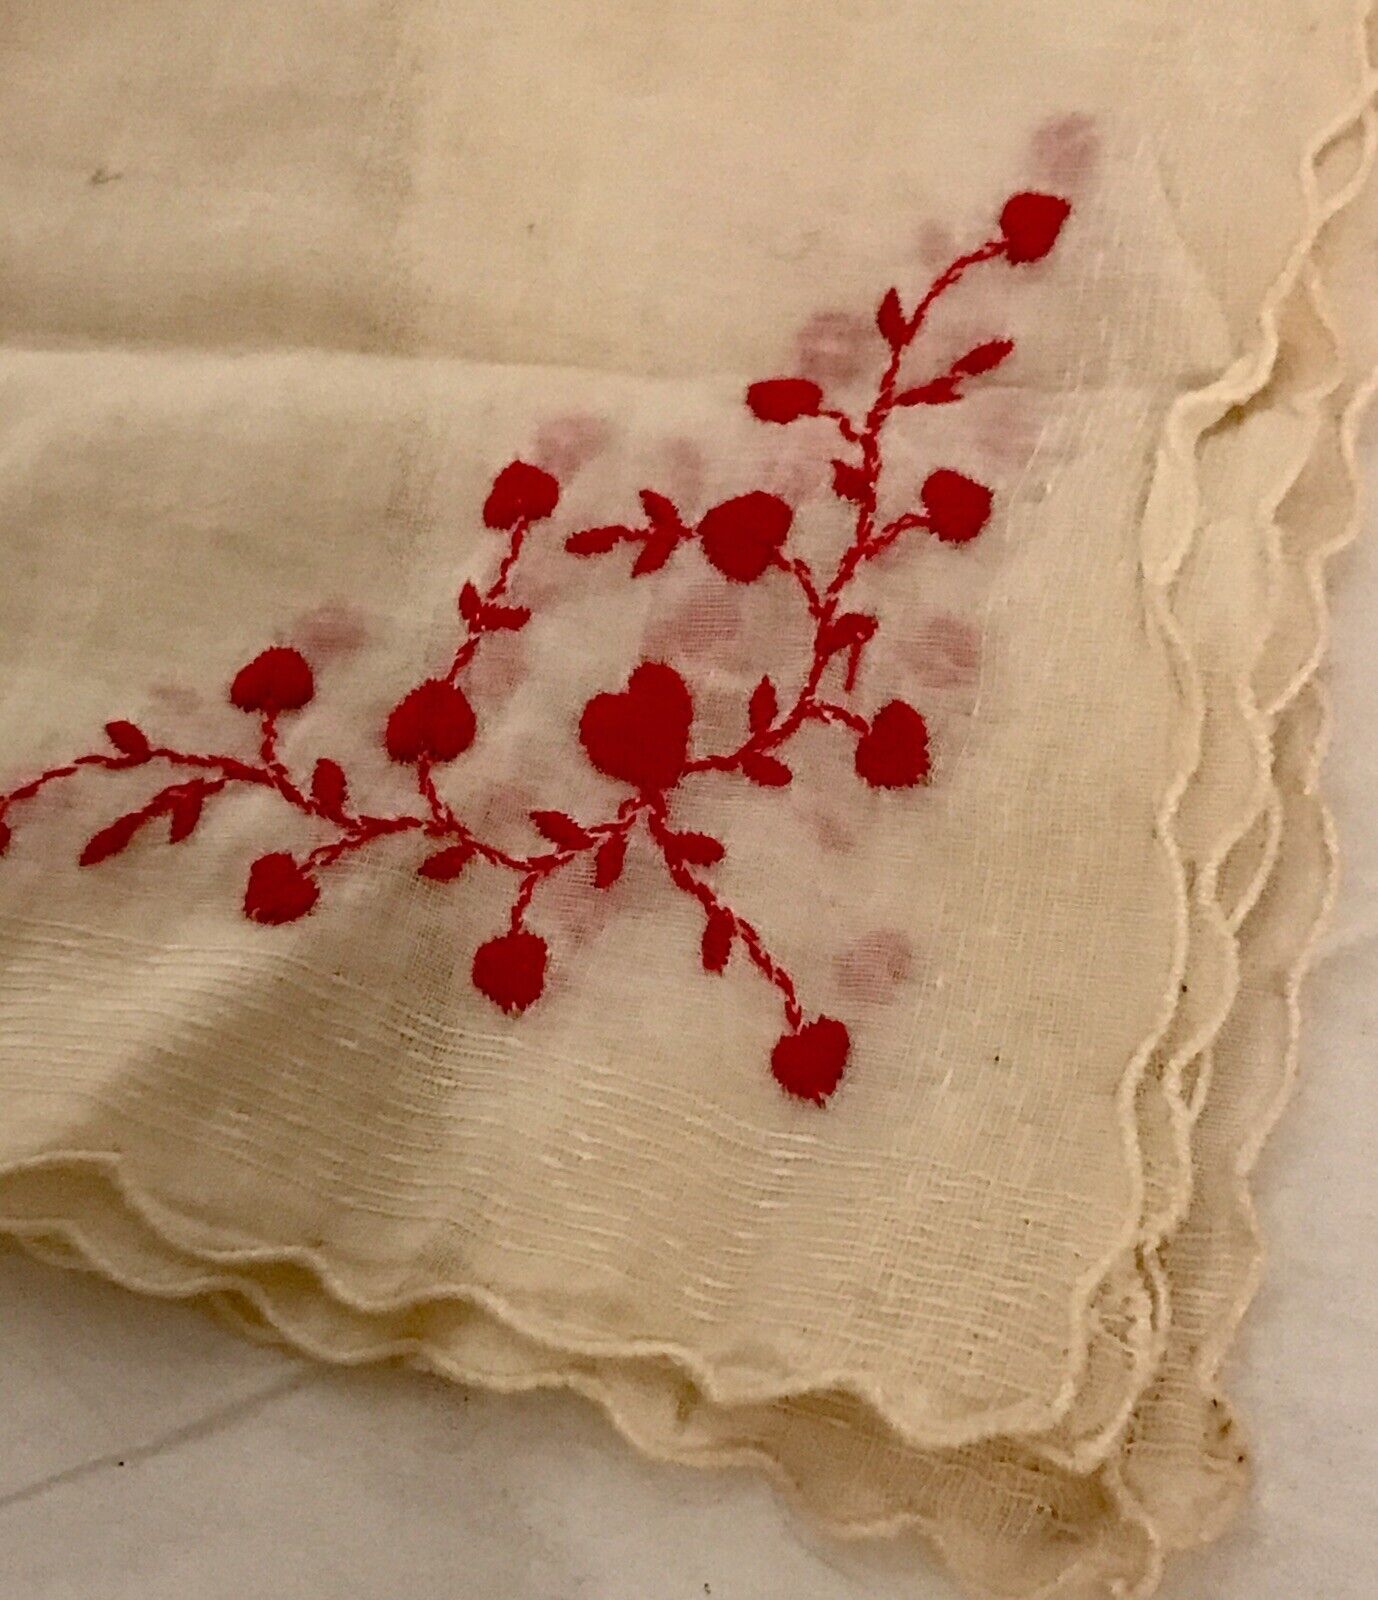 Handkerchief  9” Square  Red Flowers Heart  Scalloped Edge  Hand Embroidered